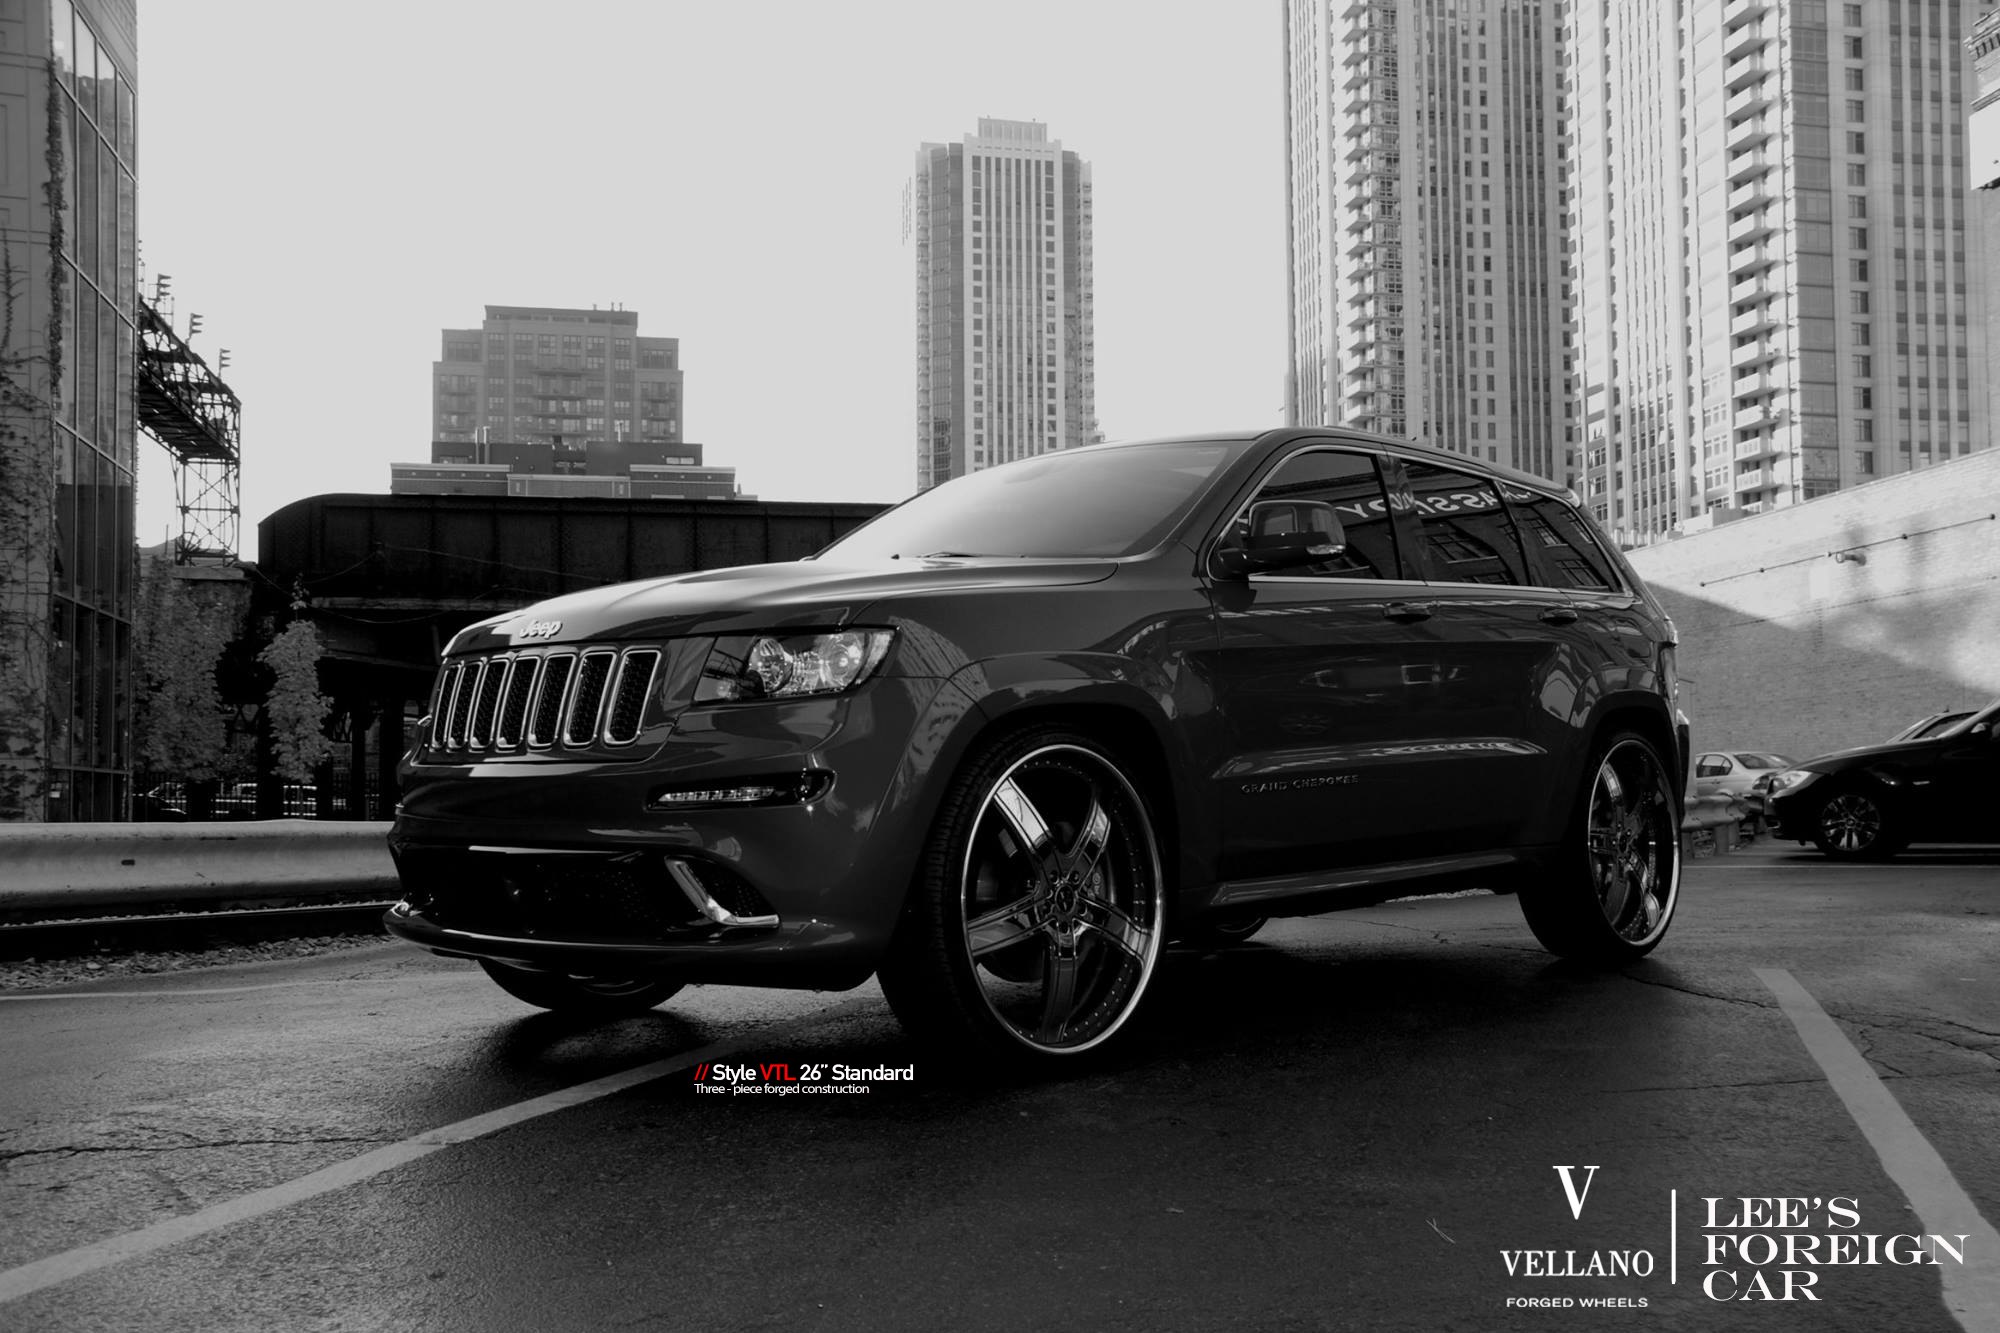 Front Bumper with LED Lights on Jeep Grand Cherokee - Photo by Vellano